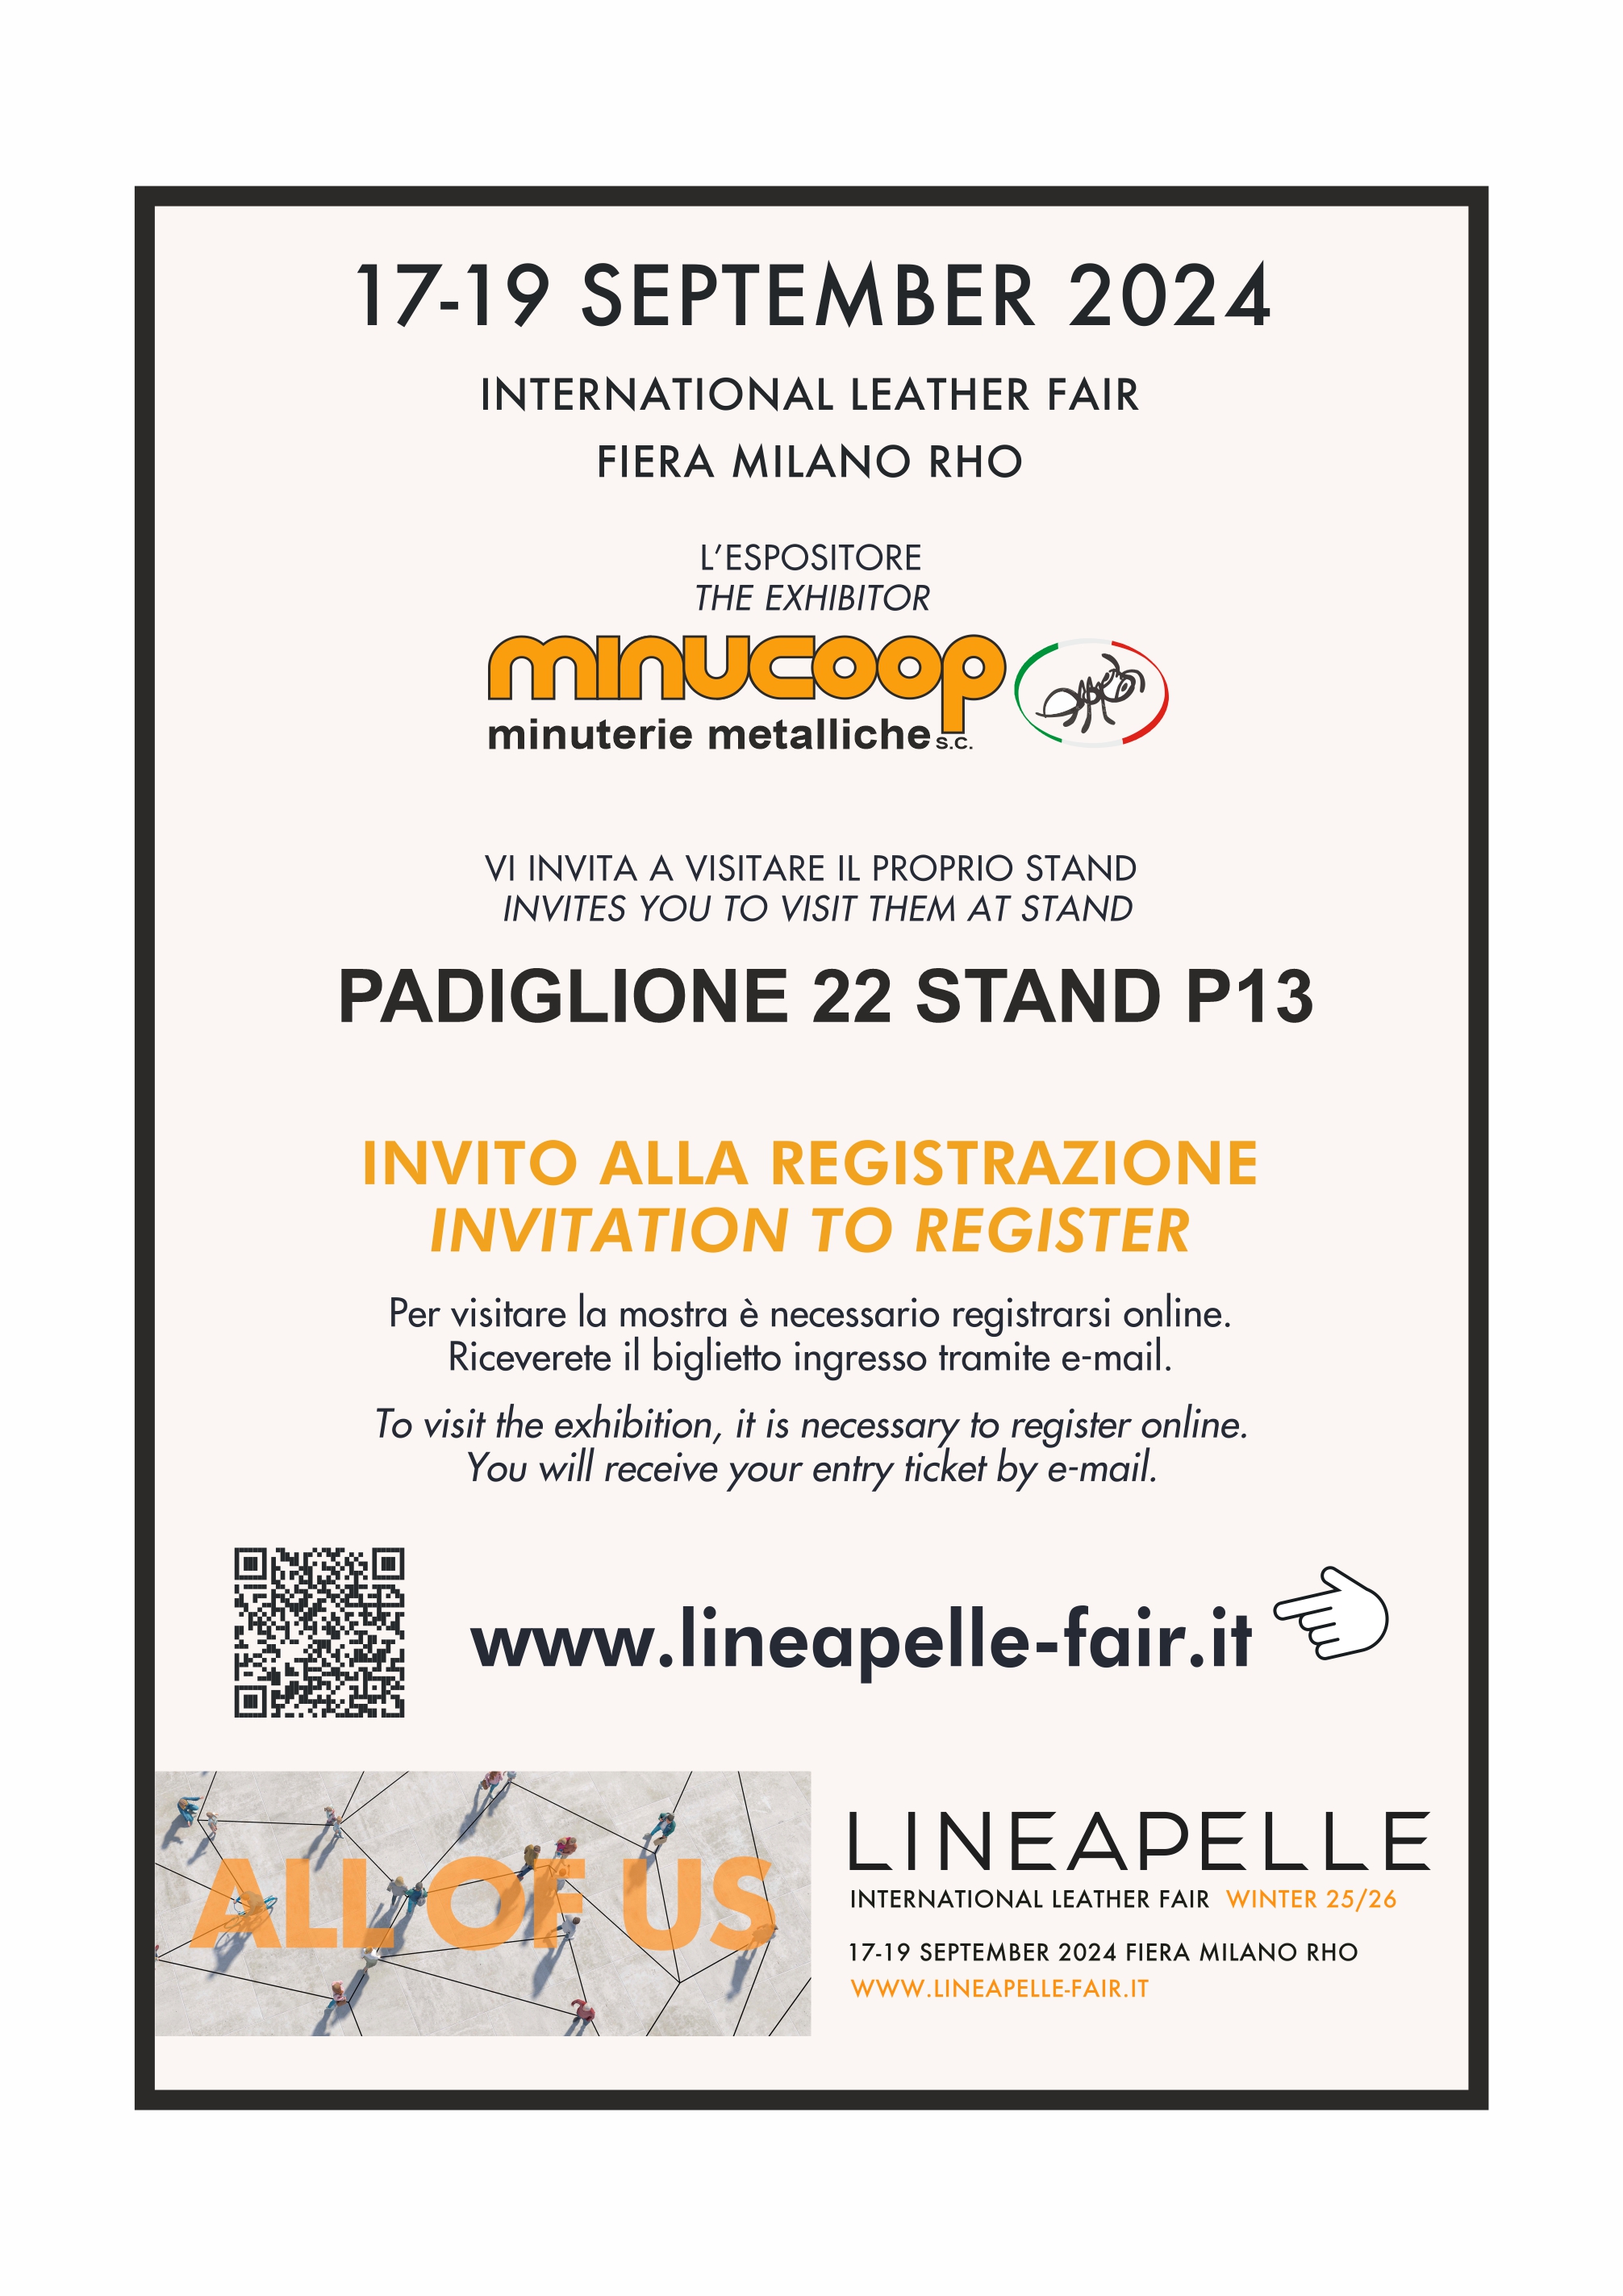 Minucoop s.c. is present at the lineapelle fair september  2024